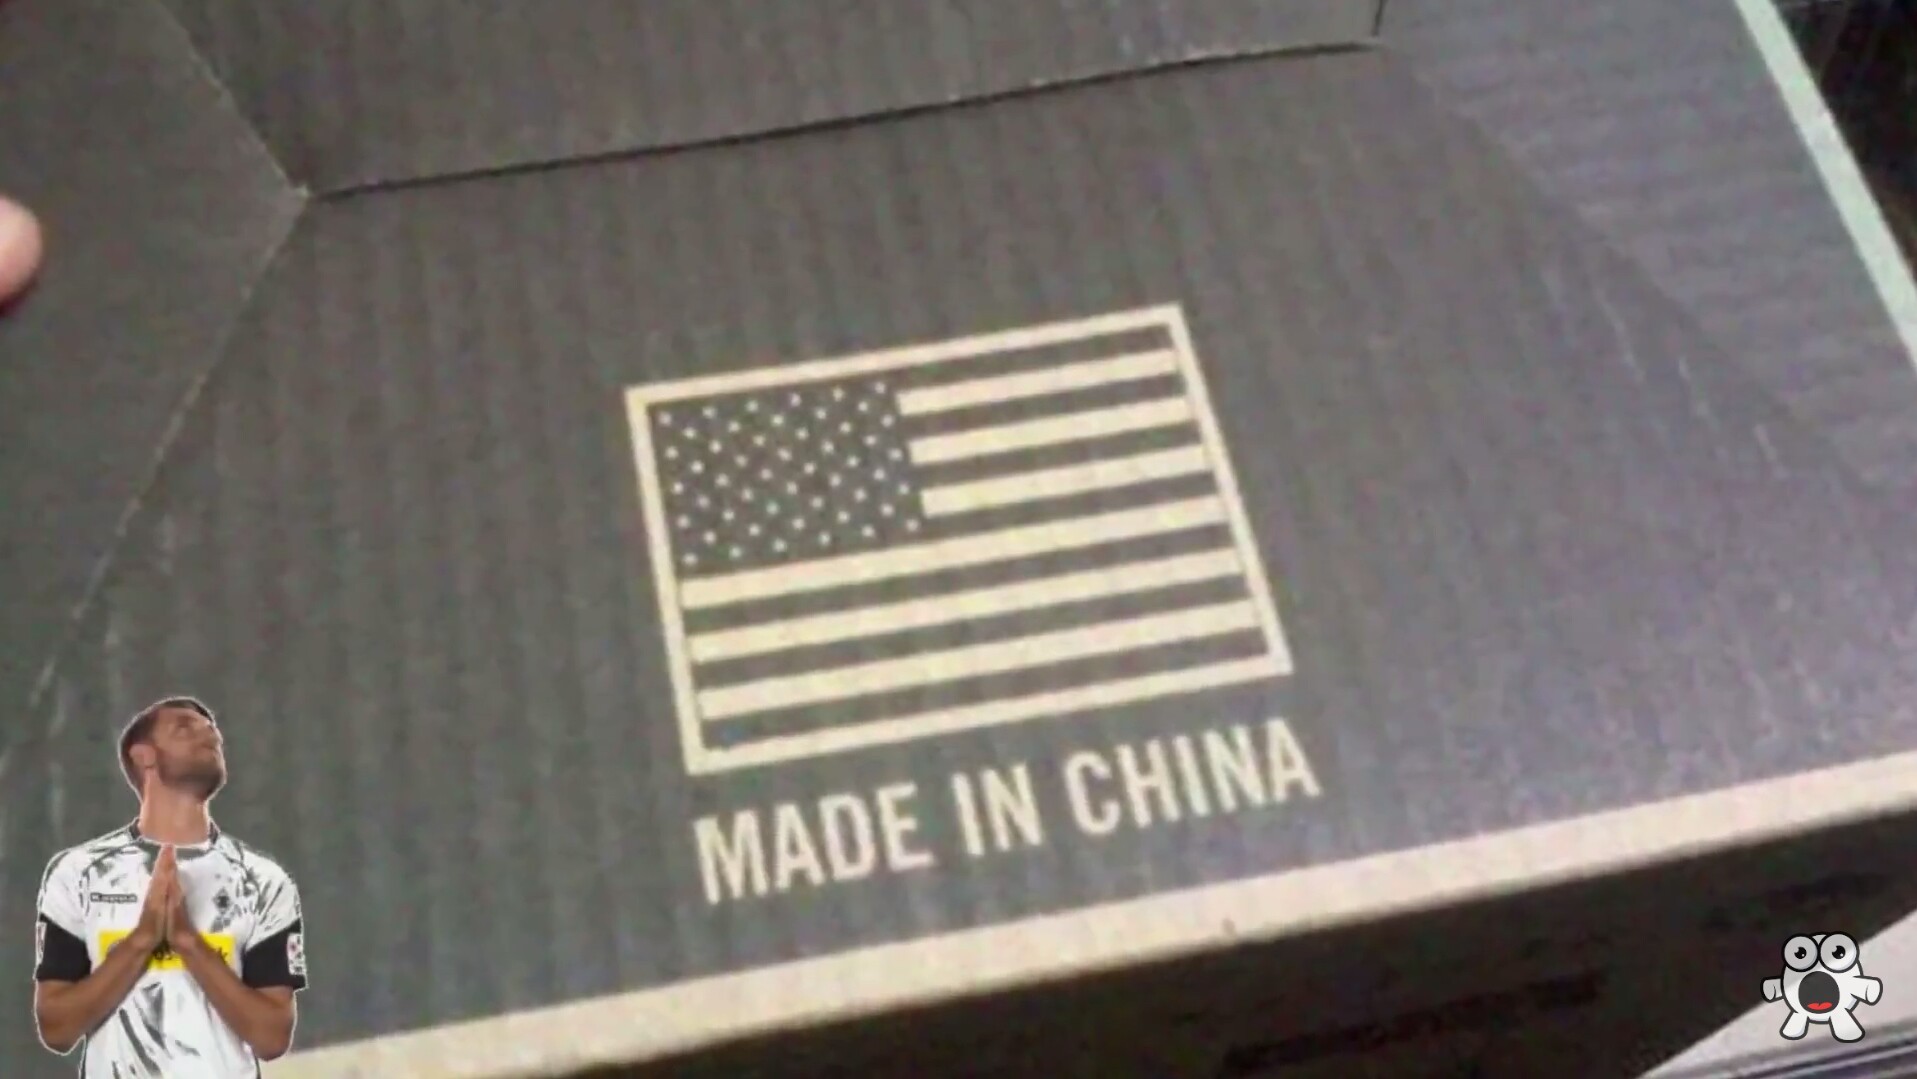 Made in china - meme